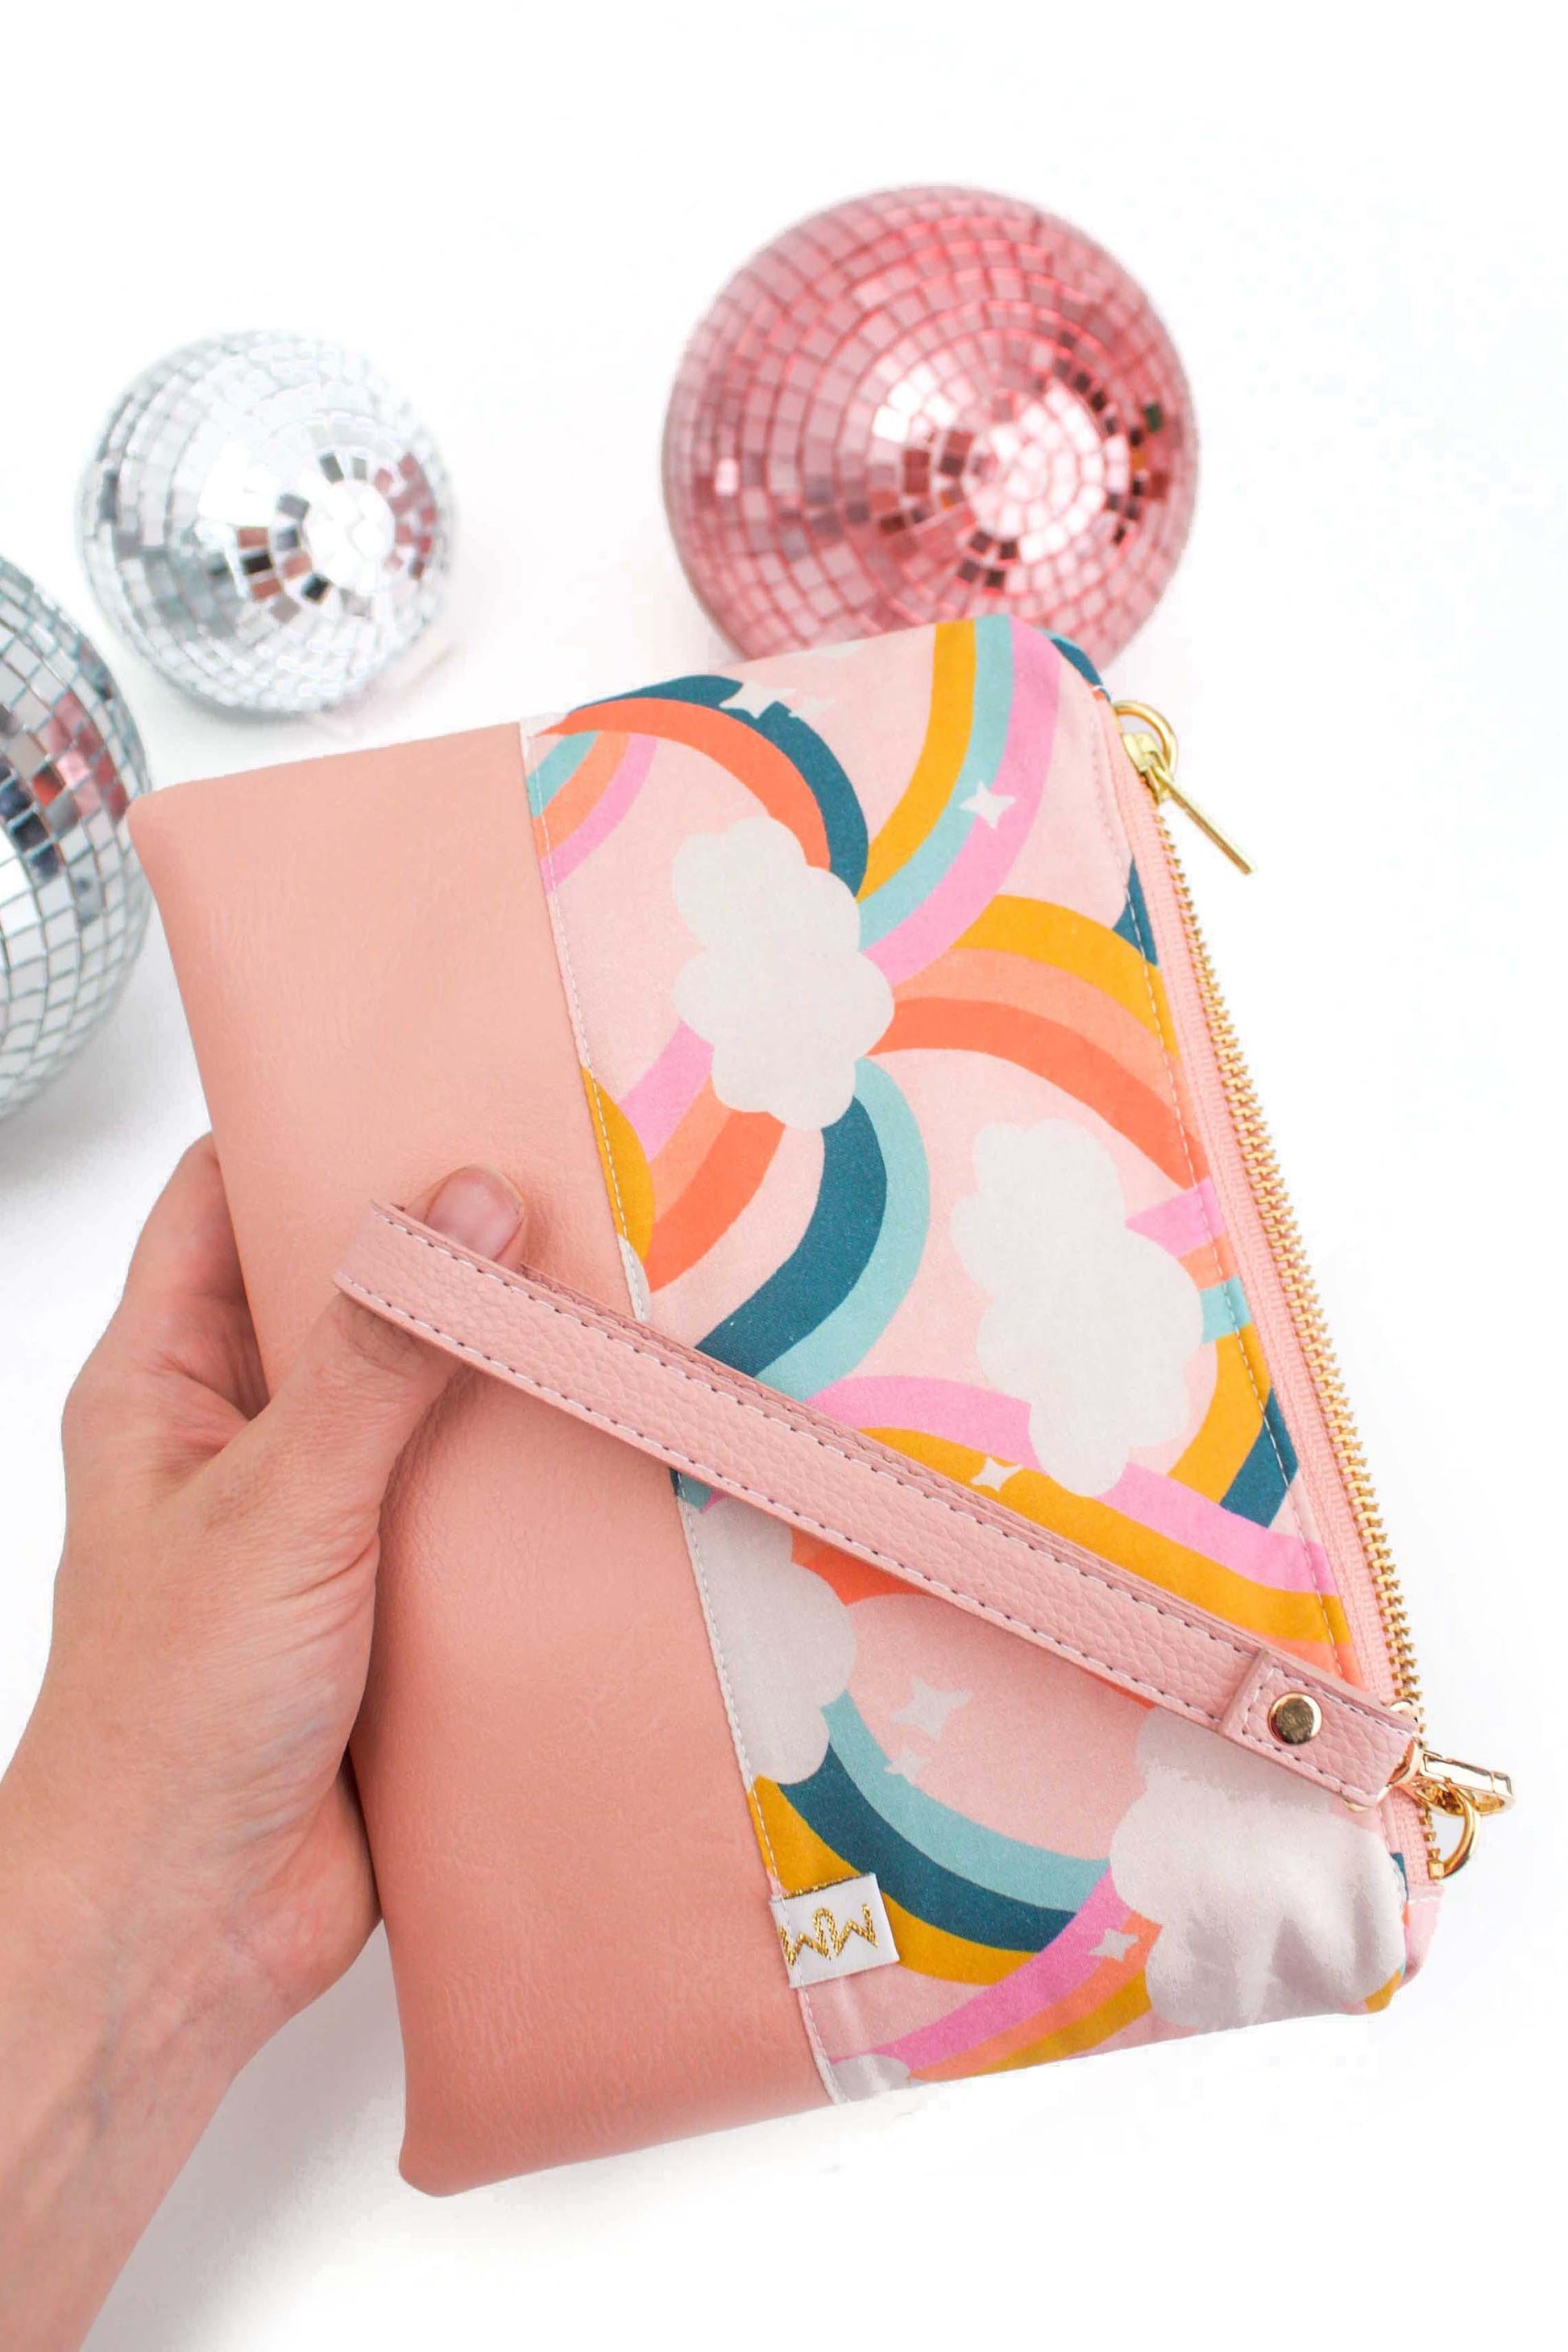 Daydream Convertible Crossbody Wristlet+ with Compartments READY TO SHIP - Modern Makerie